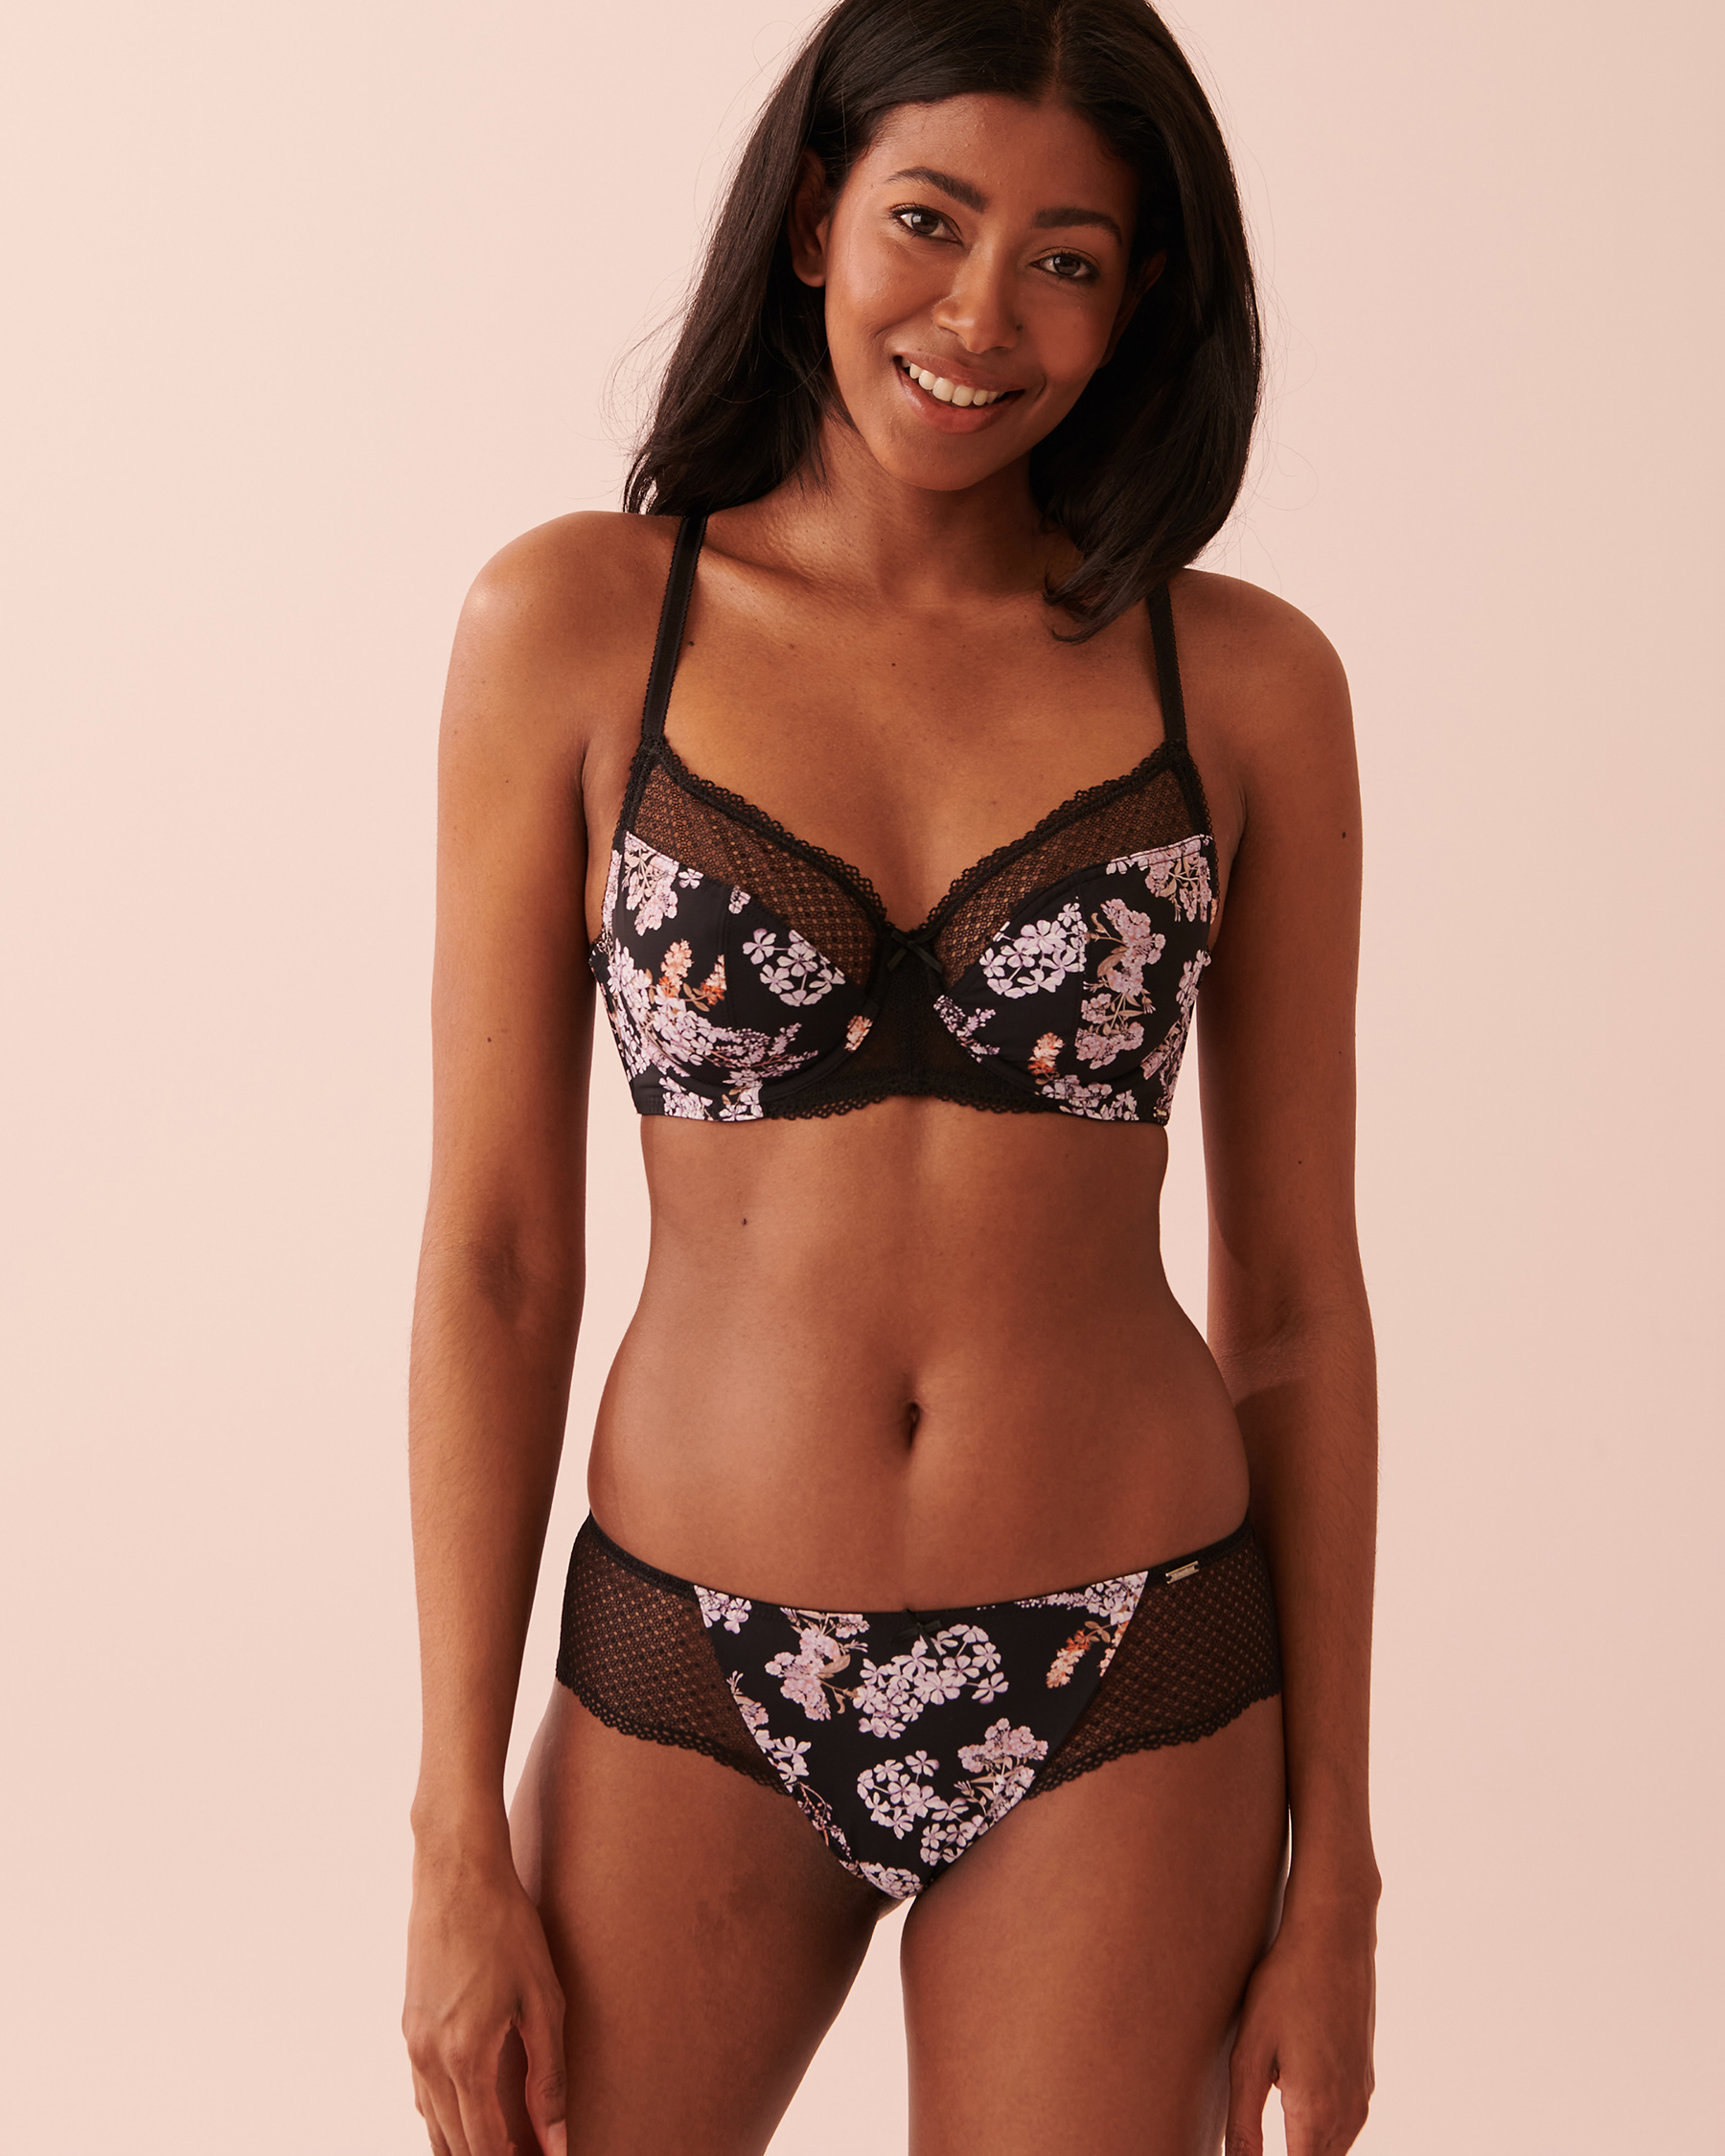 Unlined Floral Bra - Enchanted forest